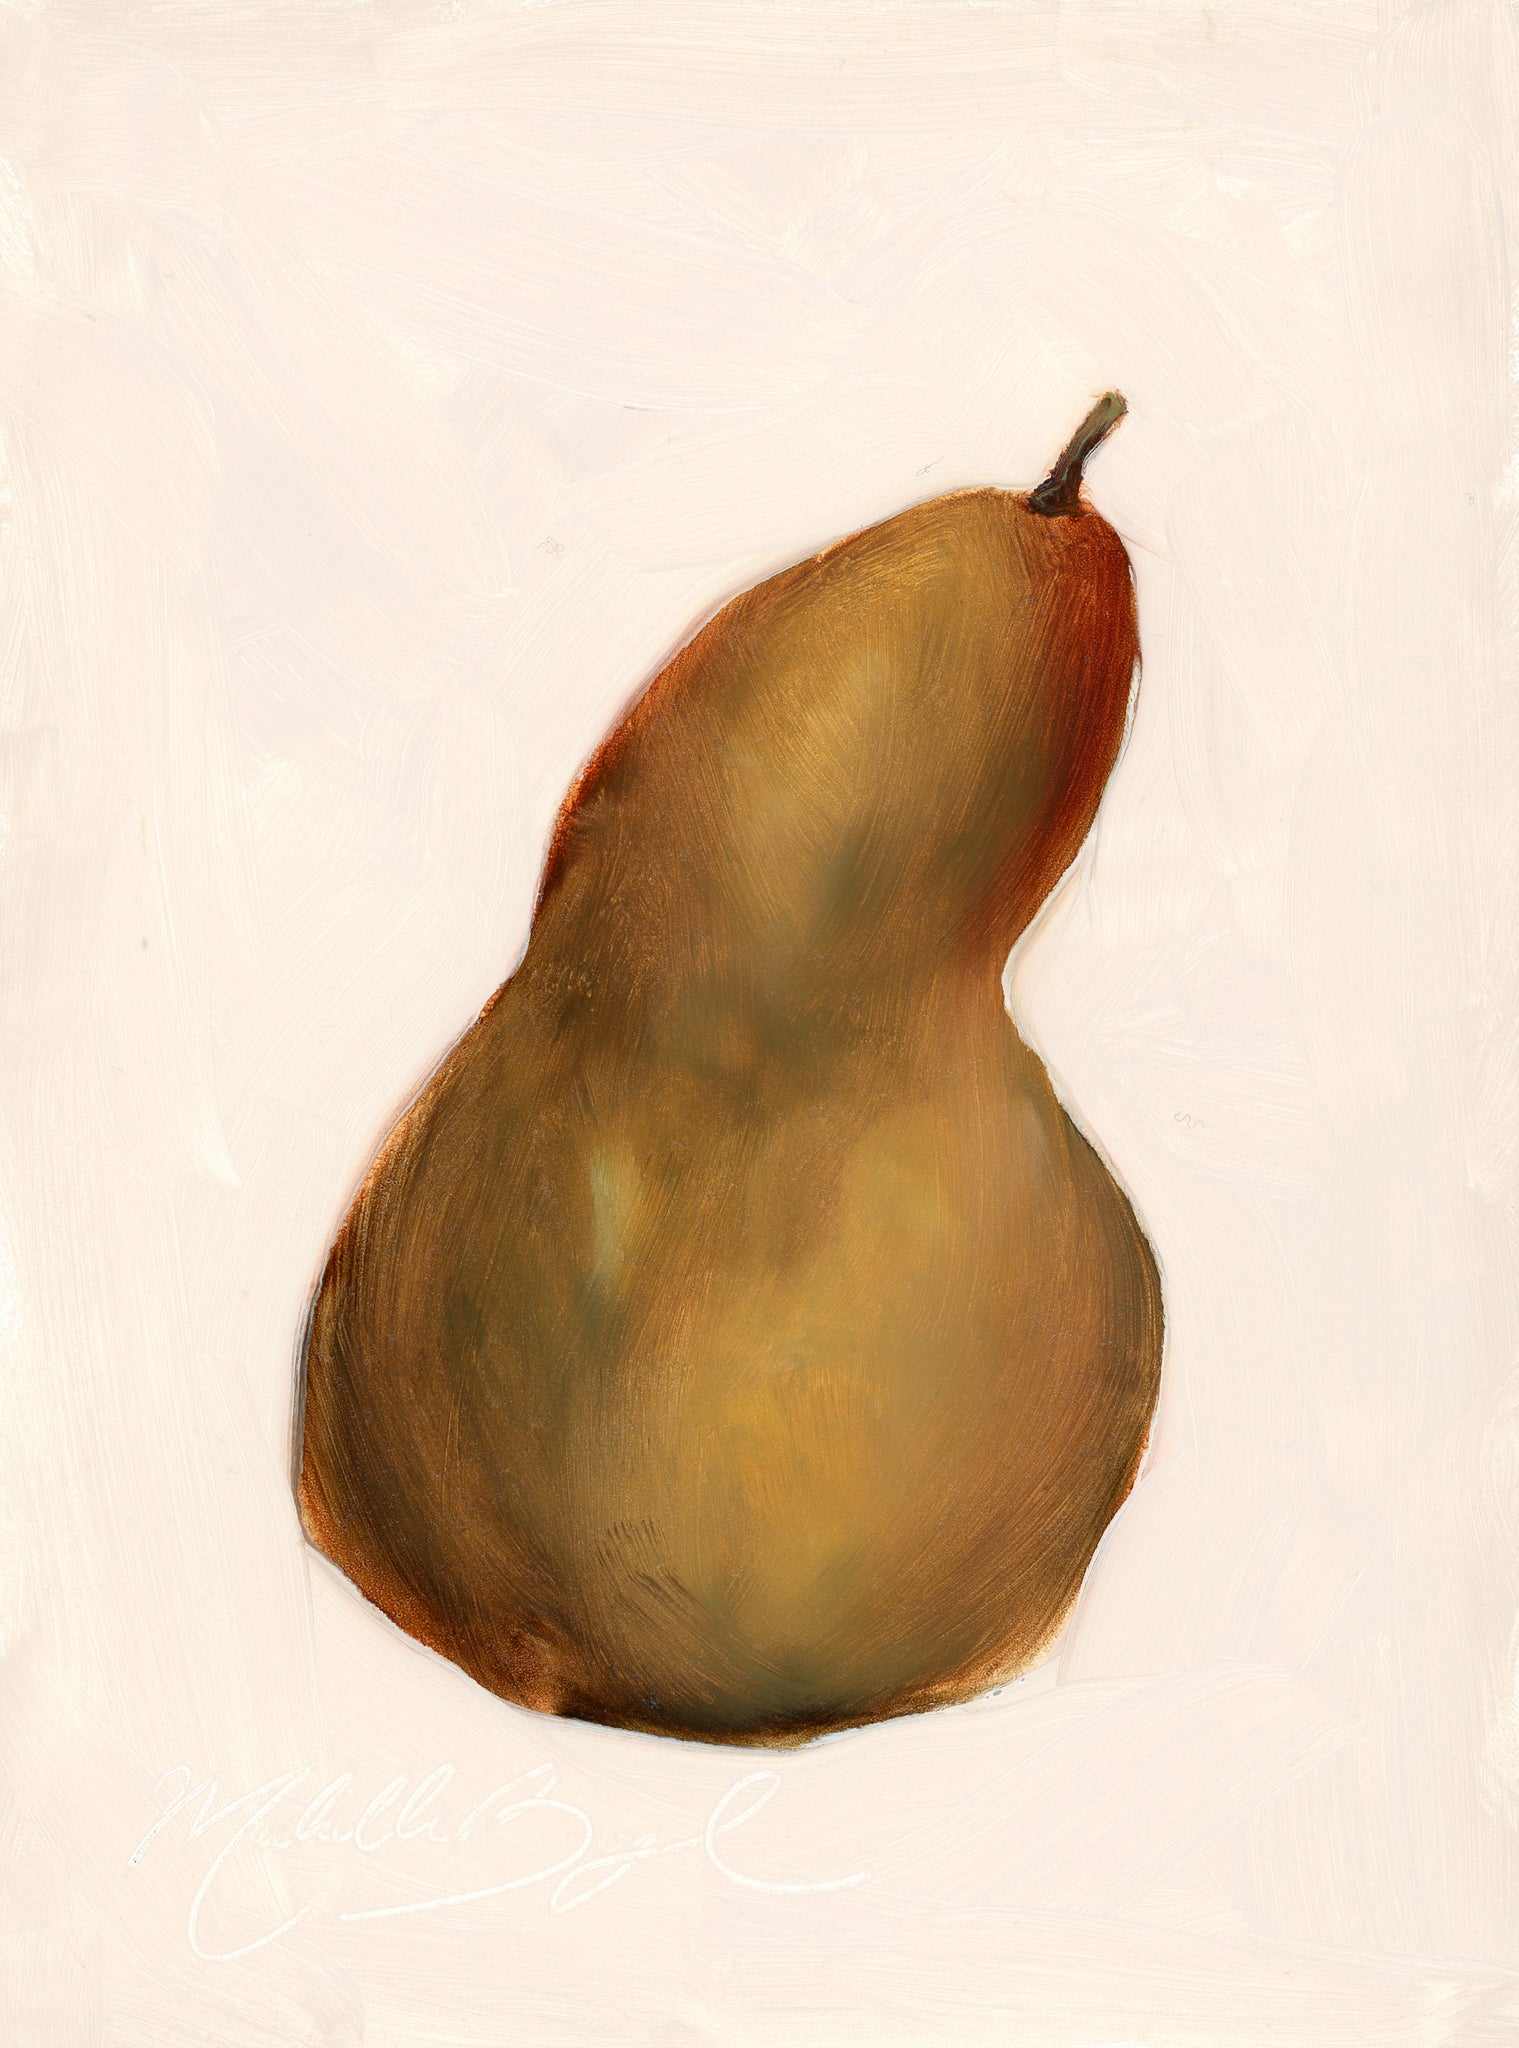 Pear No. 02 - 6x8" Oil Painting